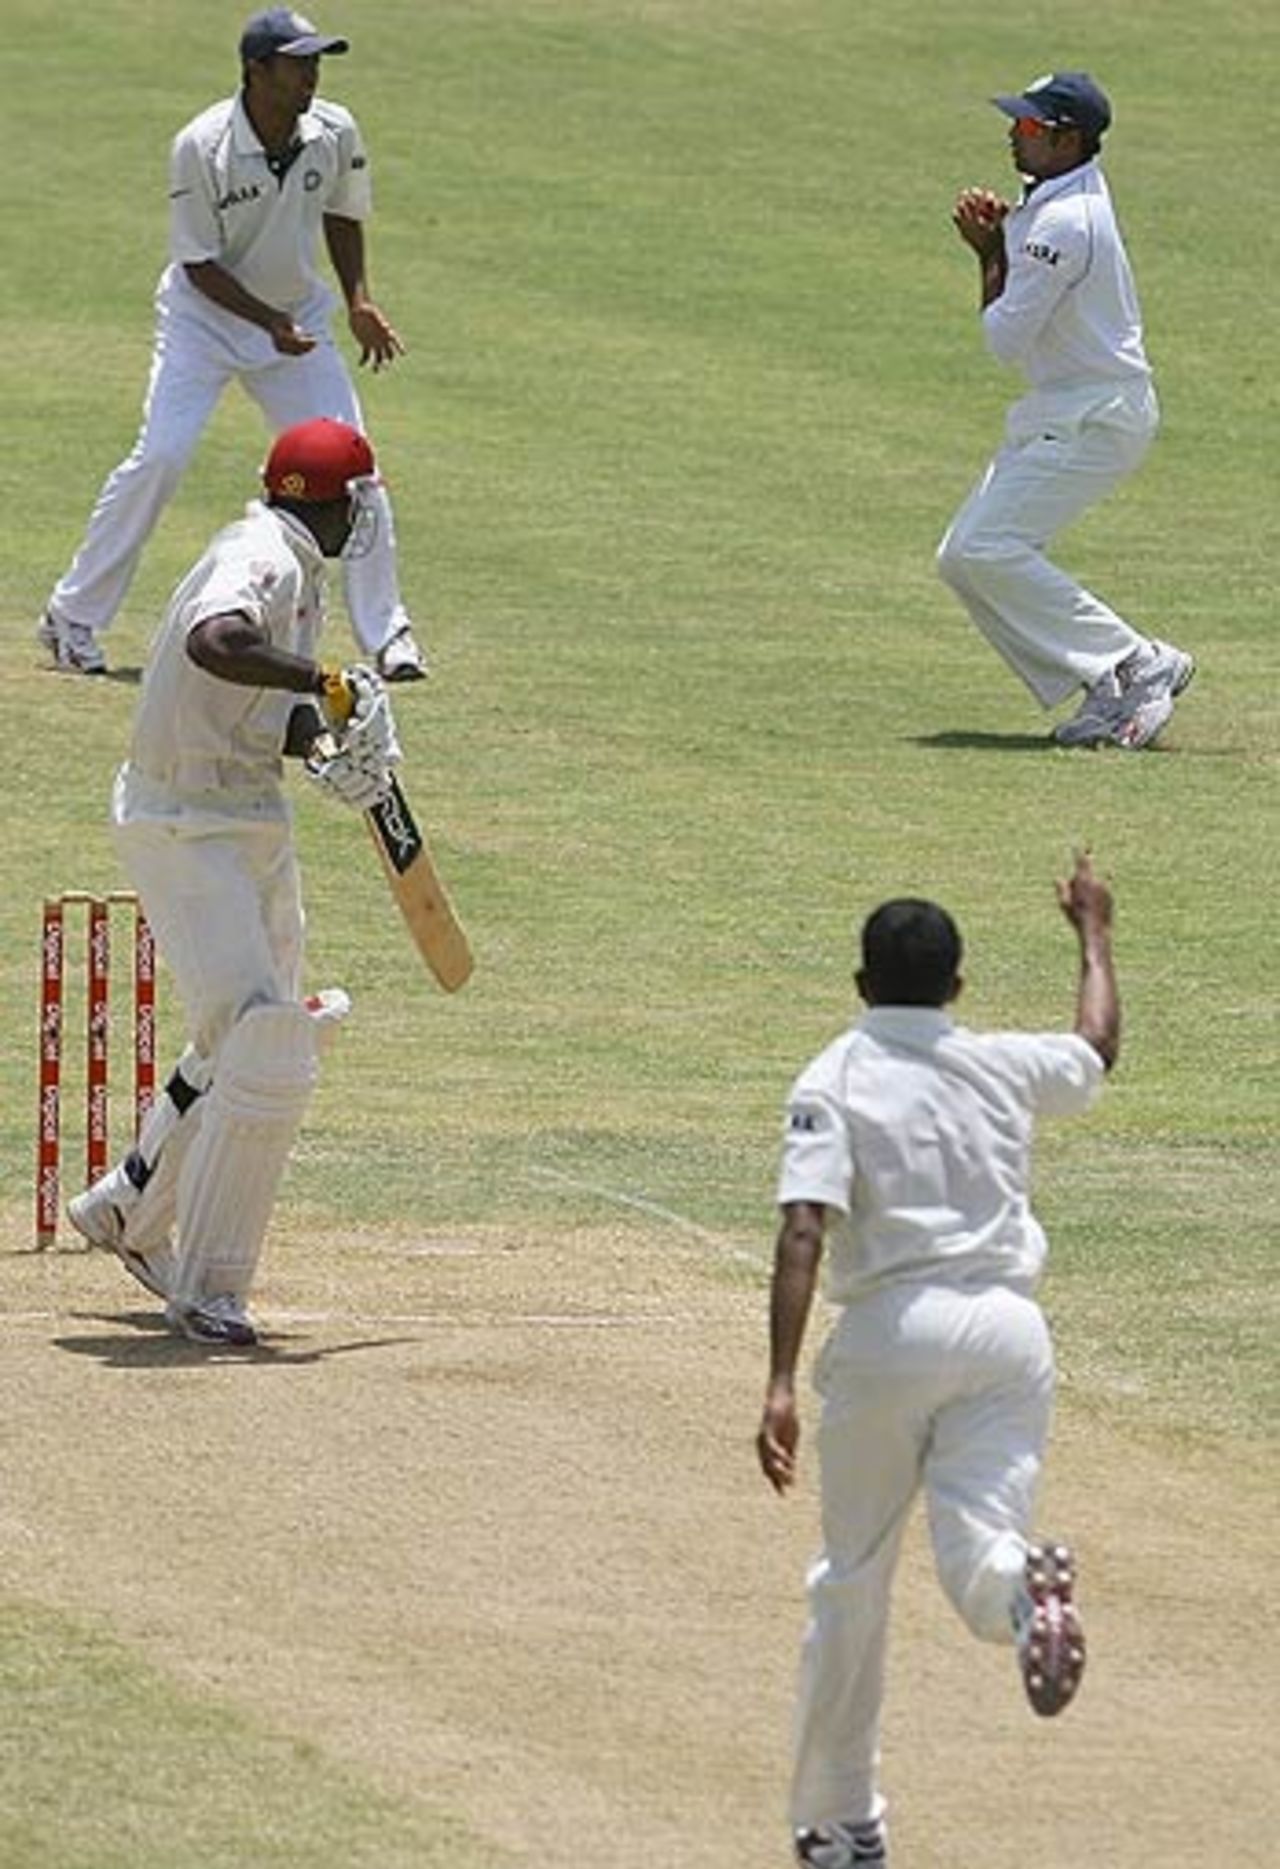 VVS Laxman snaps up Chris Gayle, West Indies v India, 4th Test, Jamaica, 3rd day, July 2, 2006